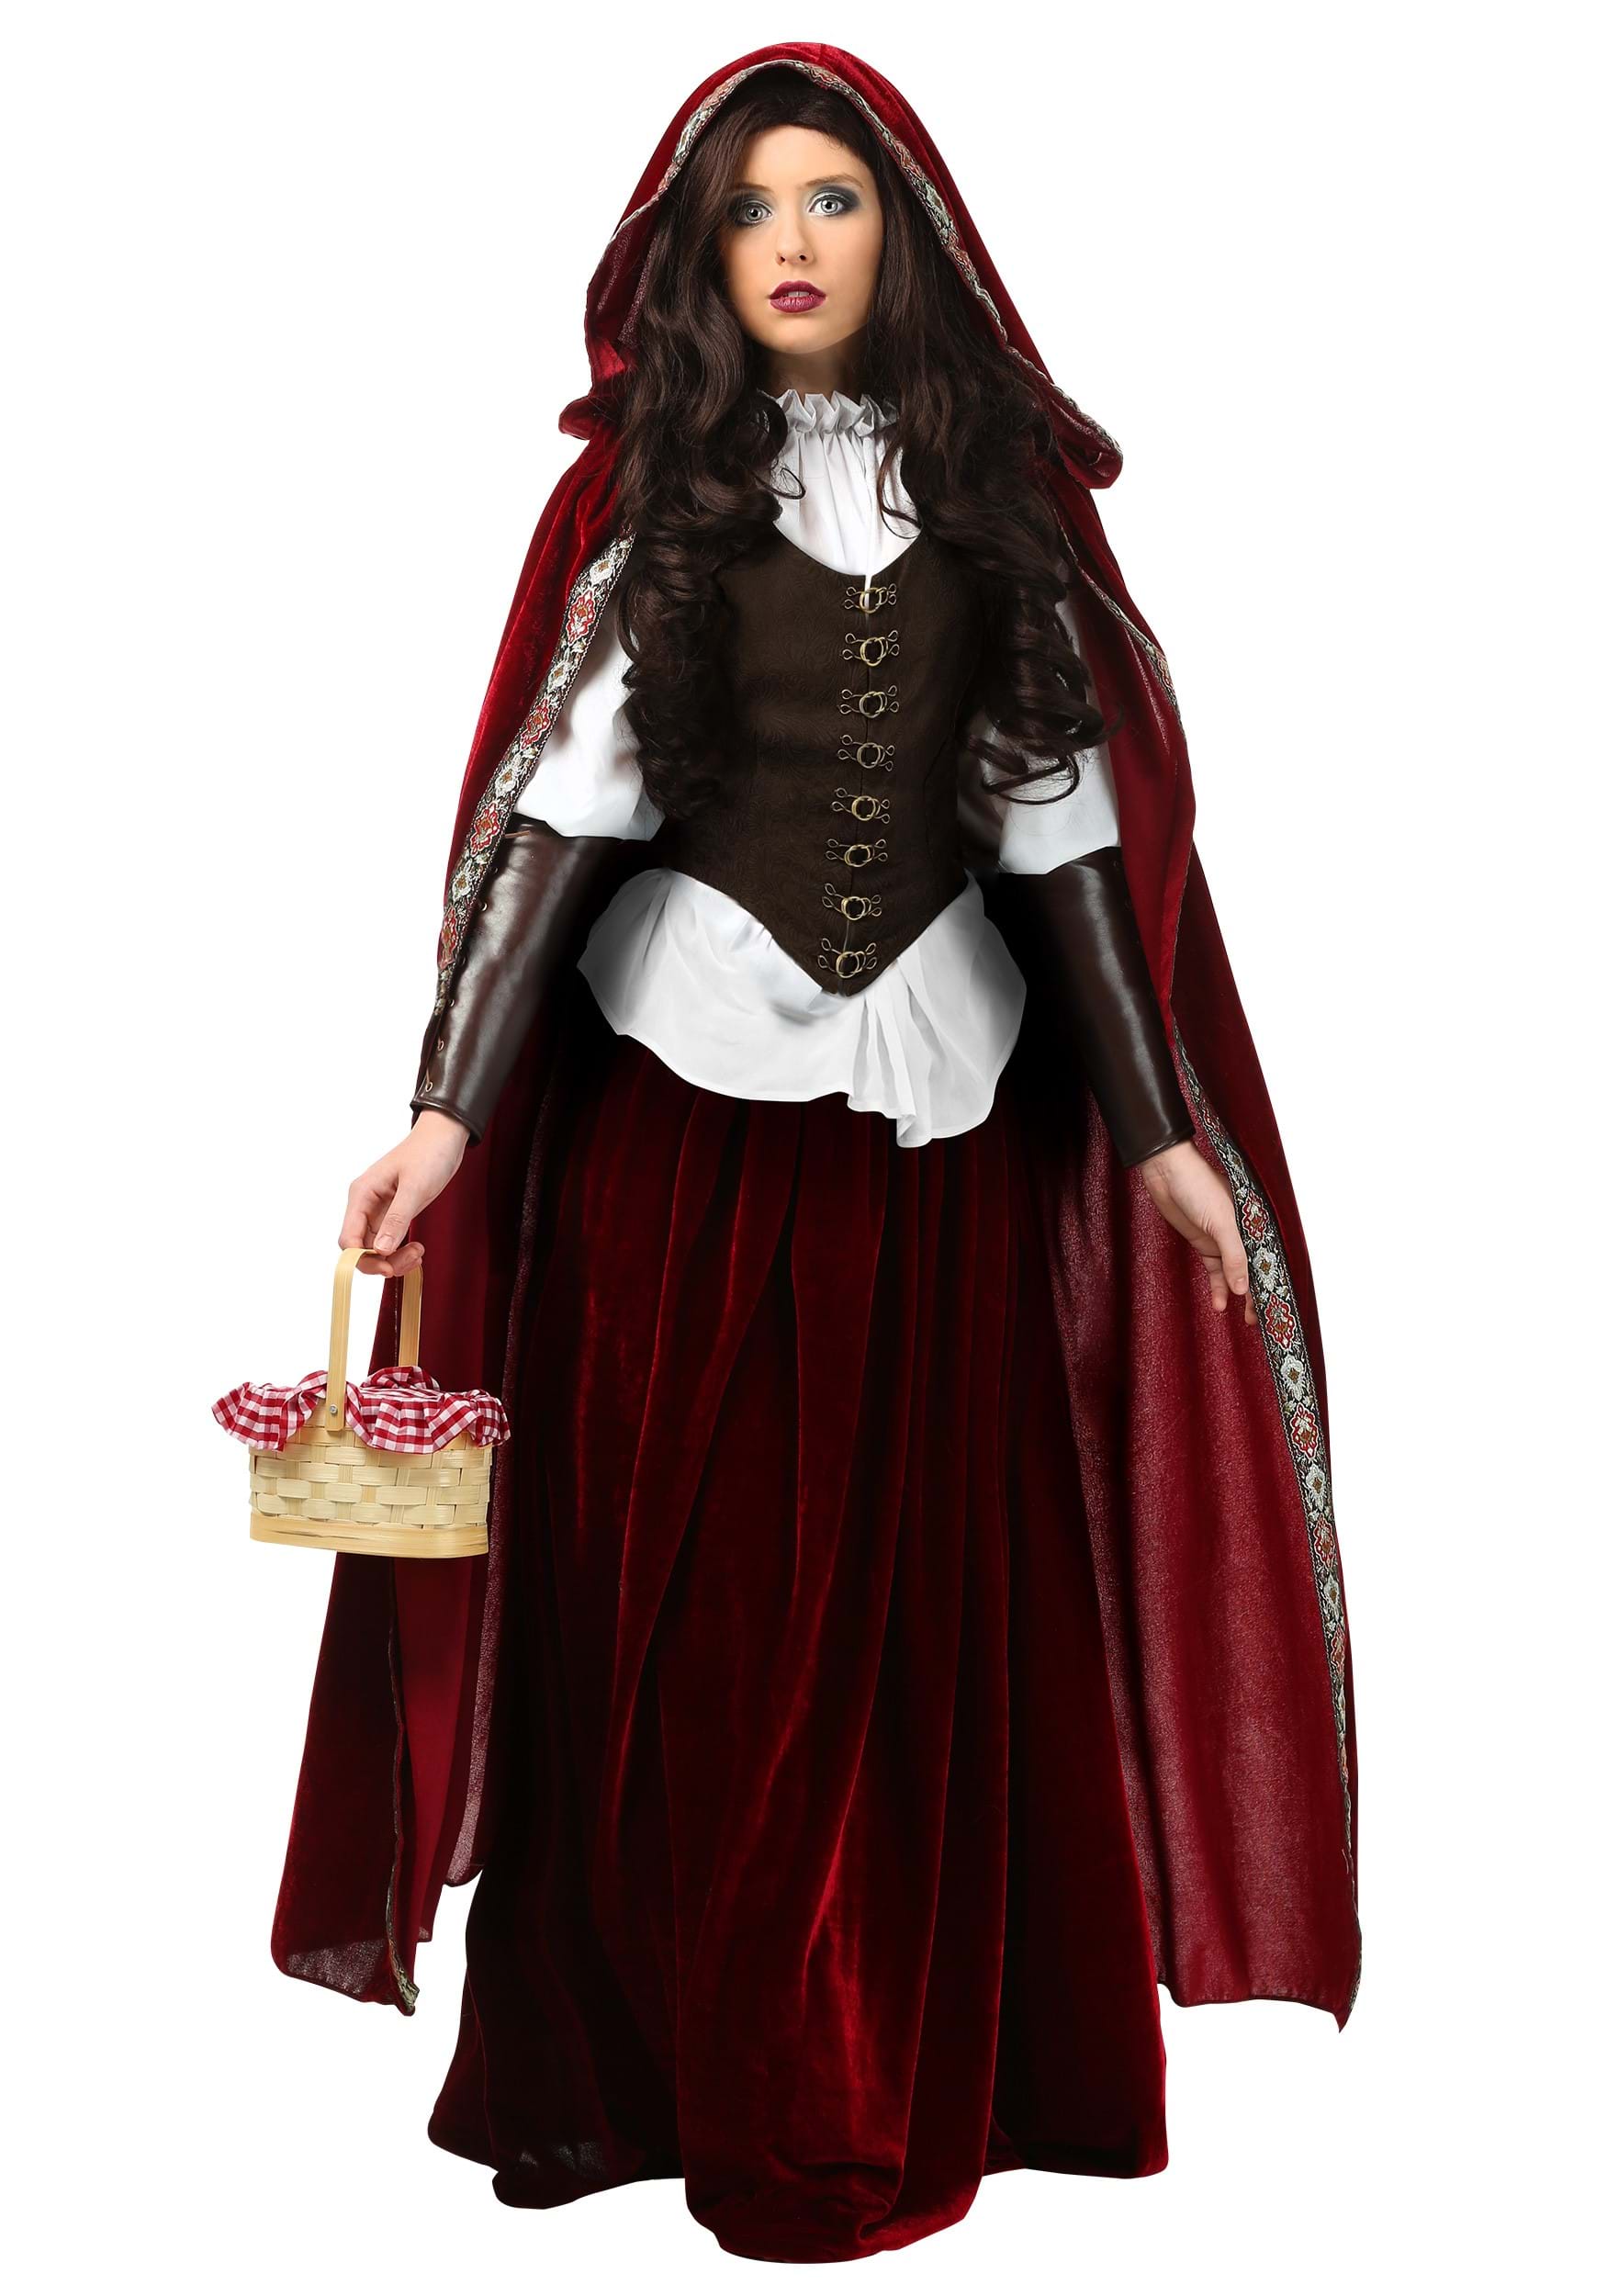 Red Riding Hood Womens Adult Fairytale Deluxe Halloween Costume